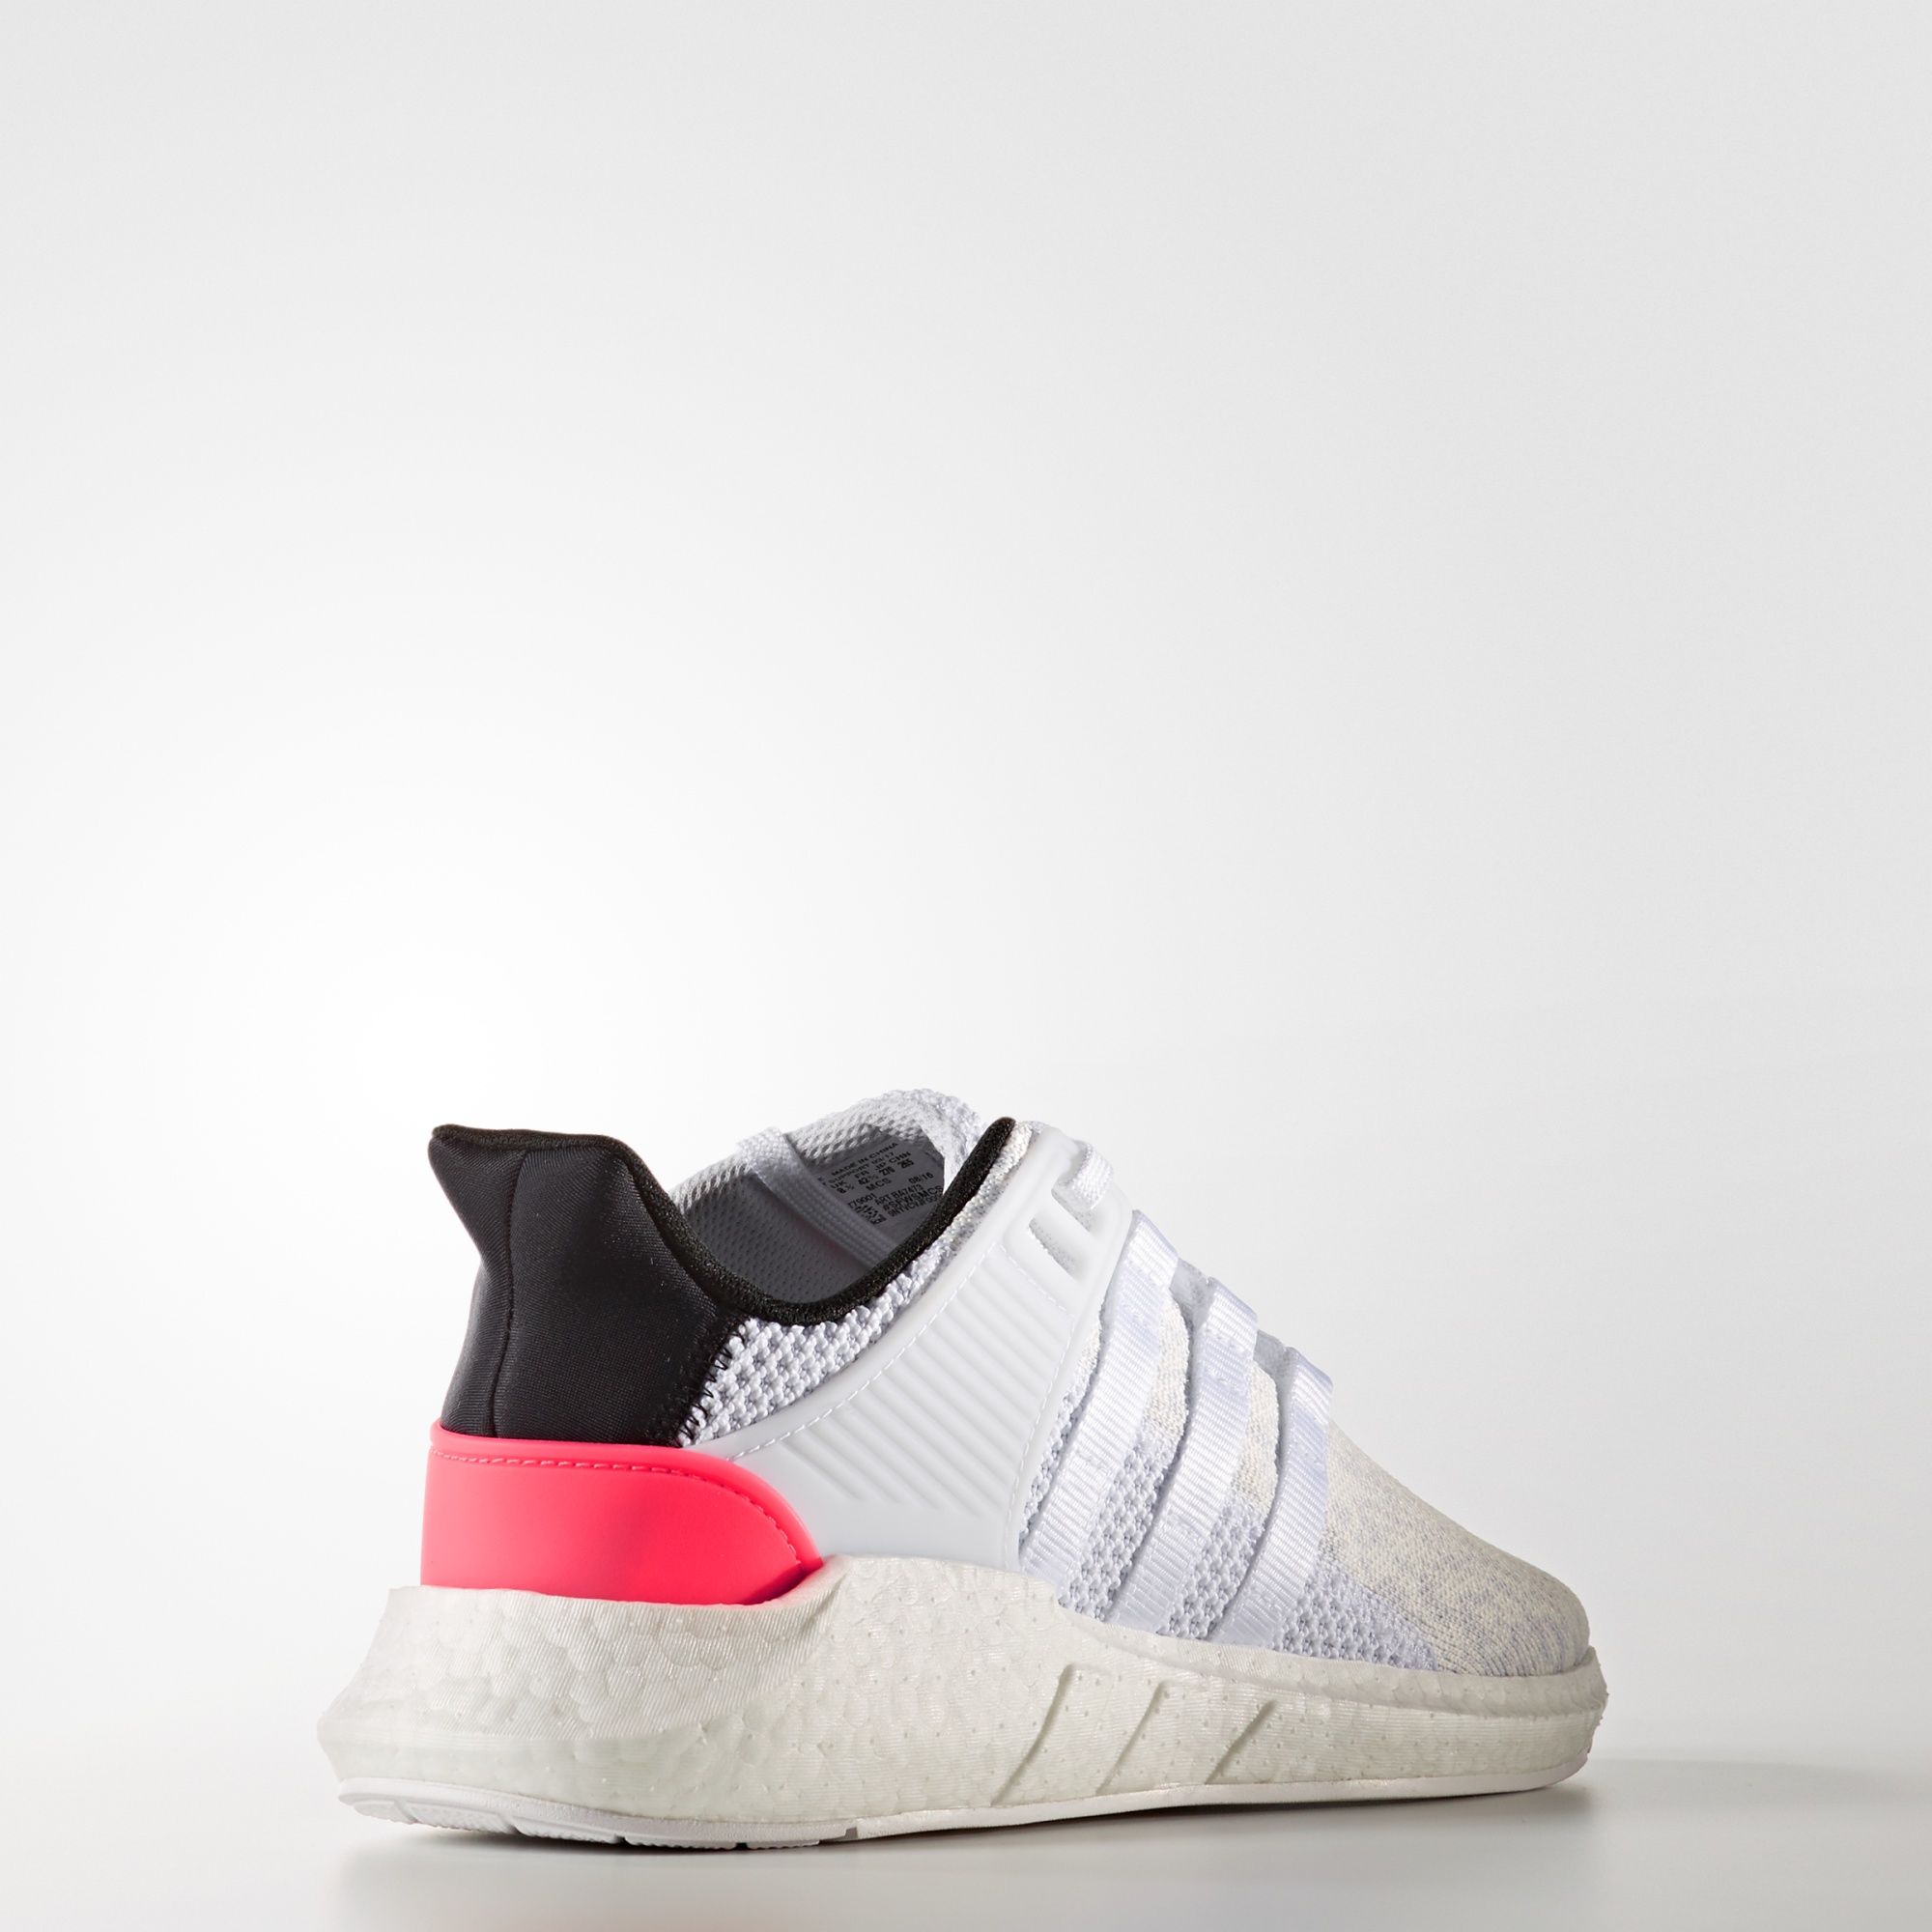 Adidas EQT Support 93/17
Footwear White / Core Black / Turbo